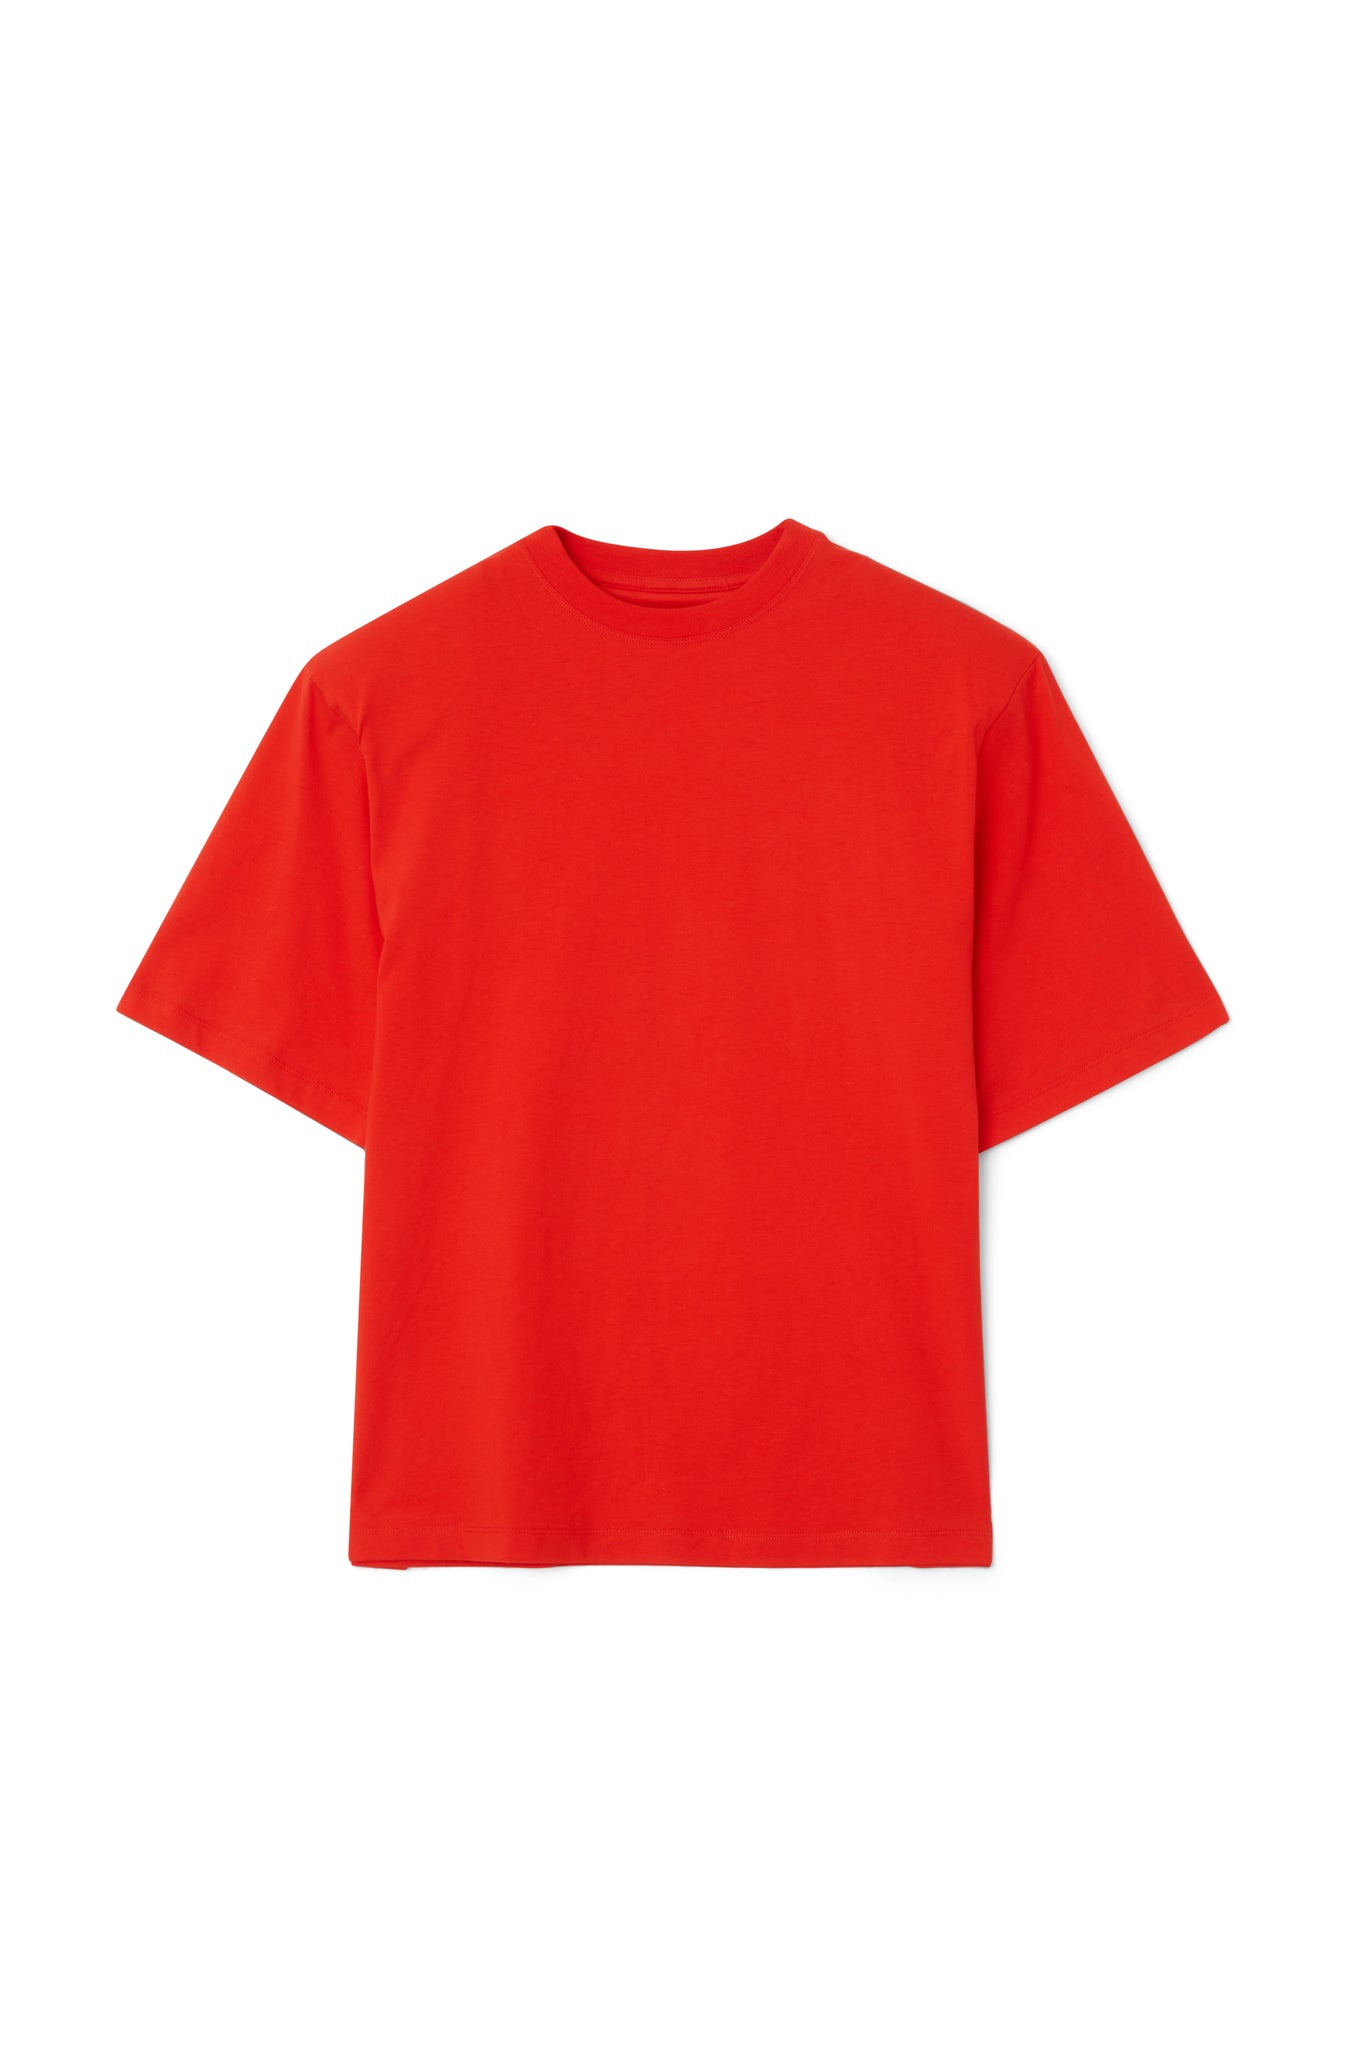 The Shoulder Pad T-shirt, Red